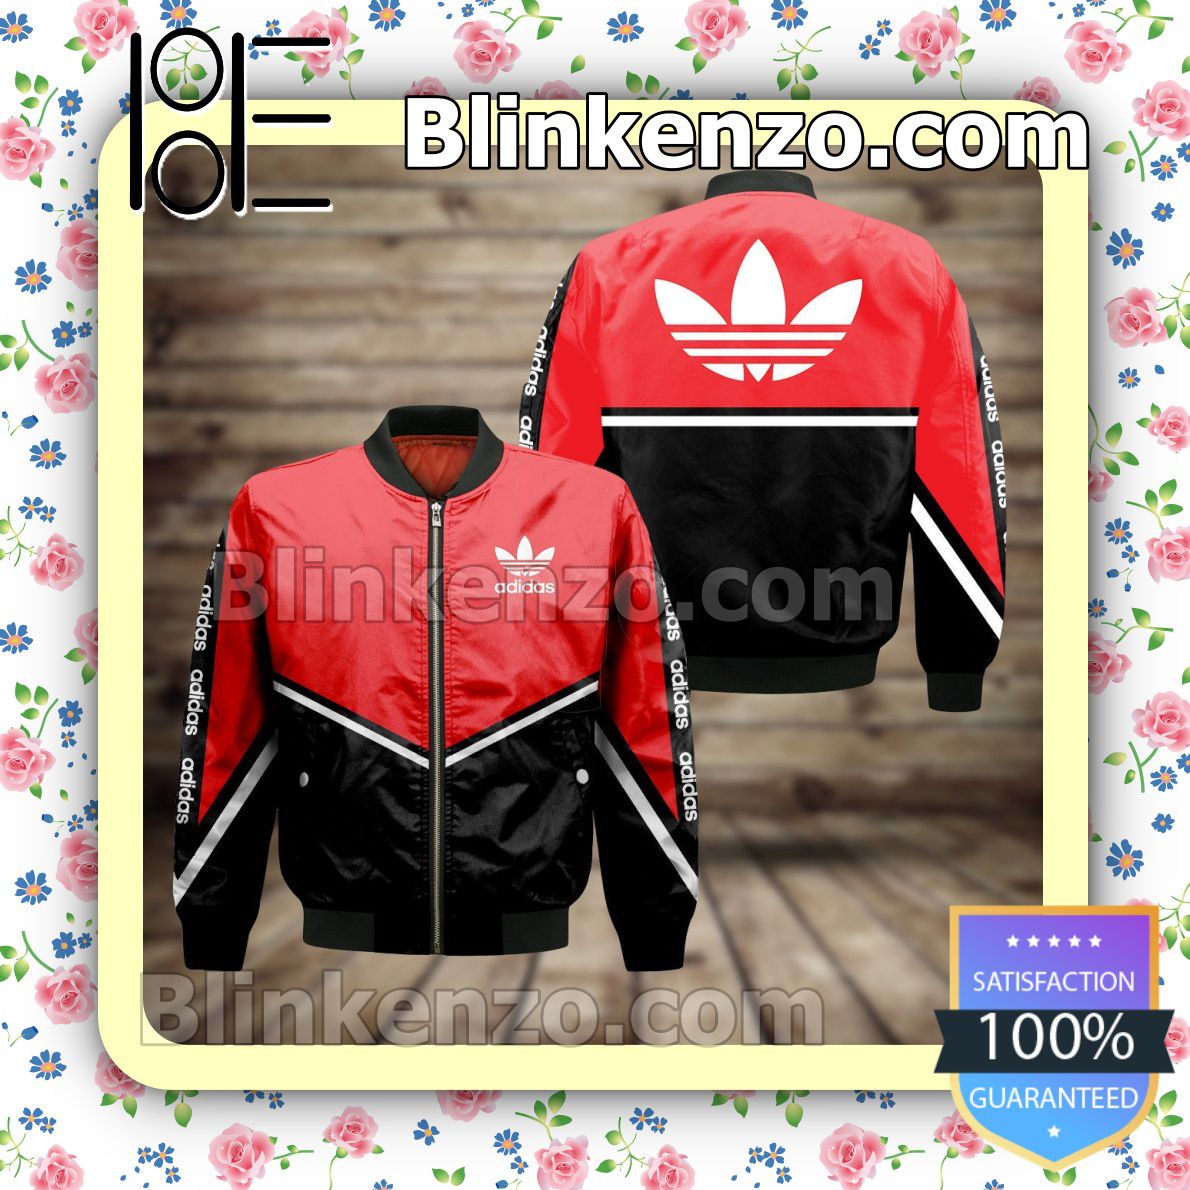 Adidas Black And Red With White Stripe Military Jacket Sportwear